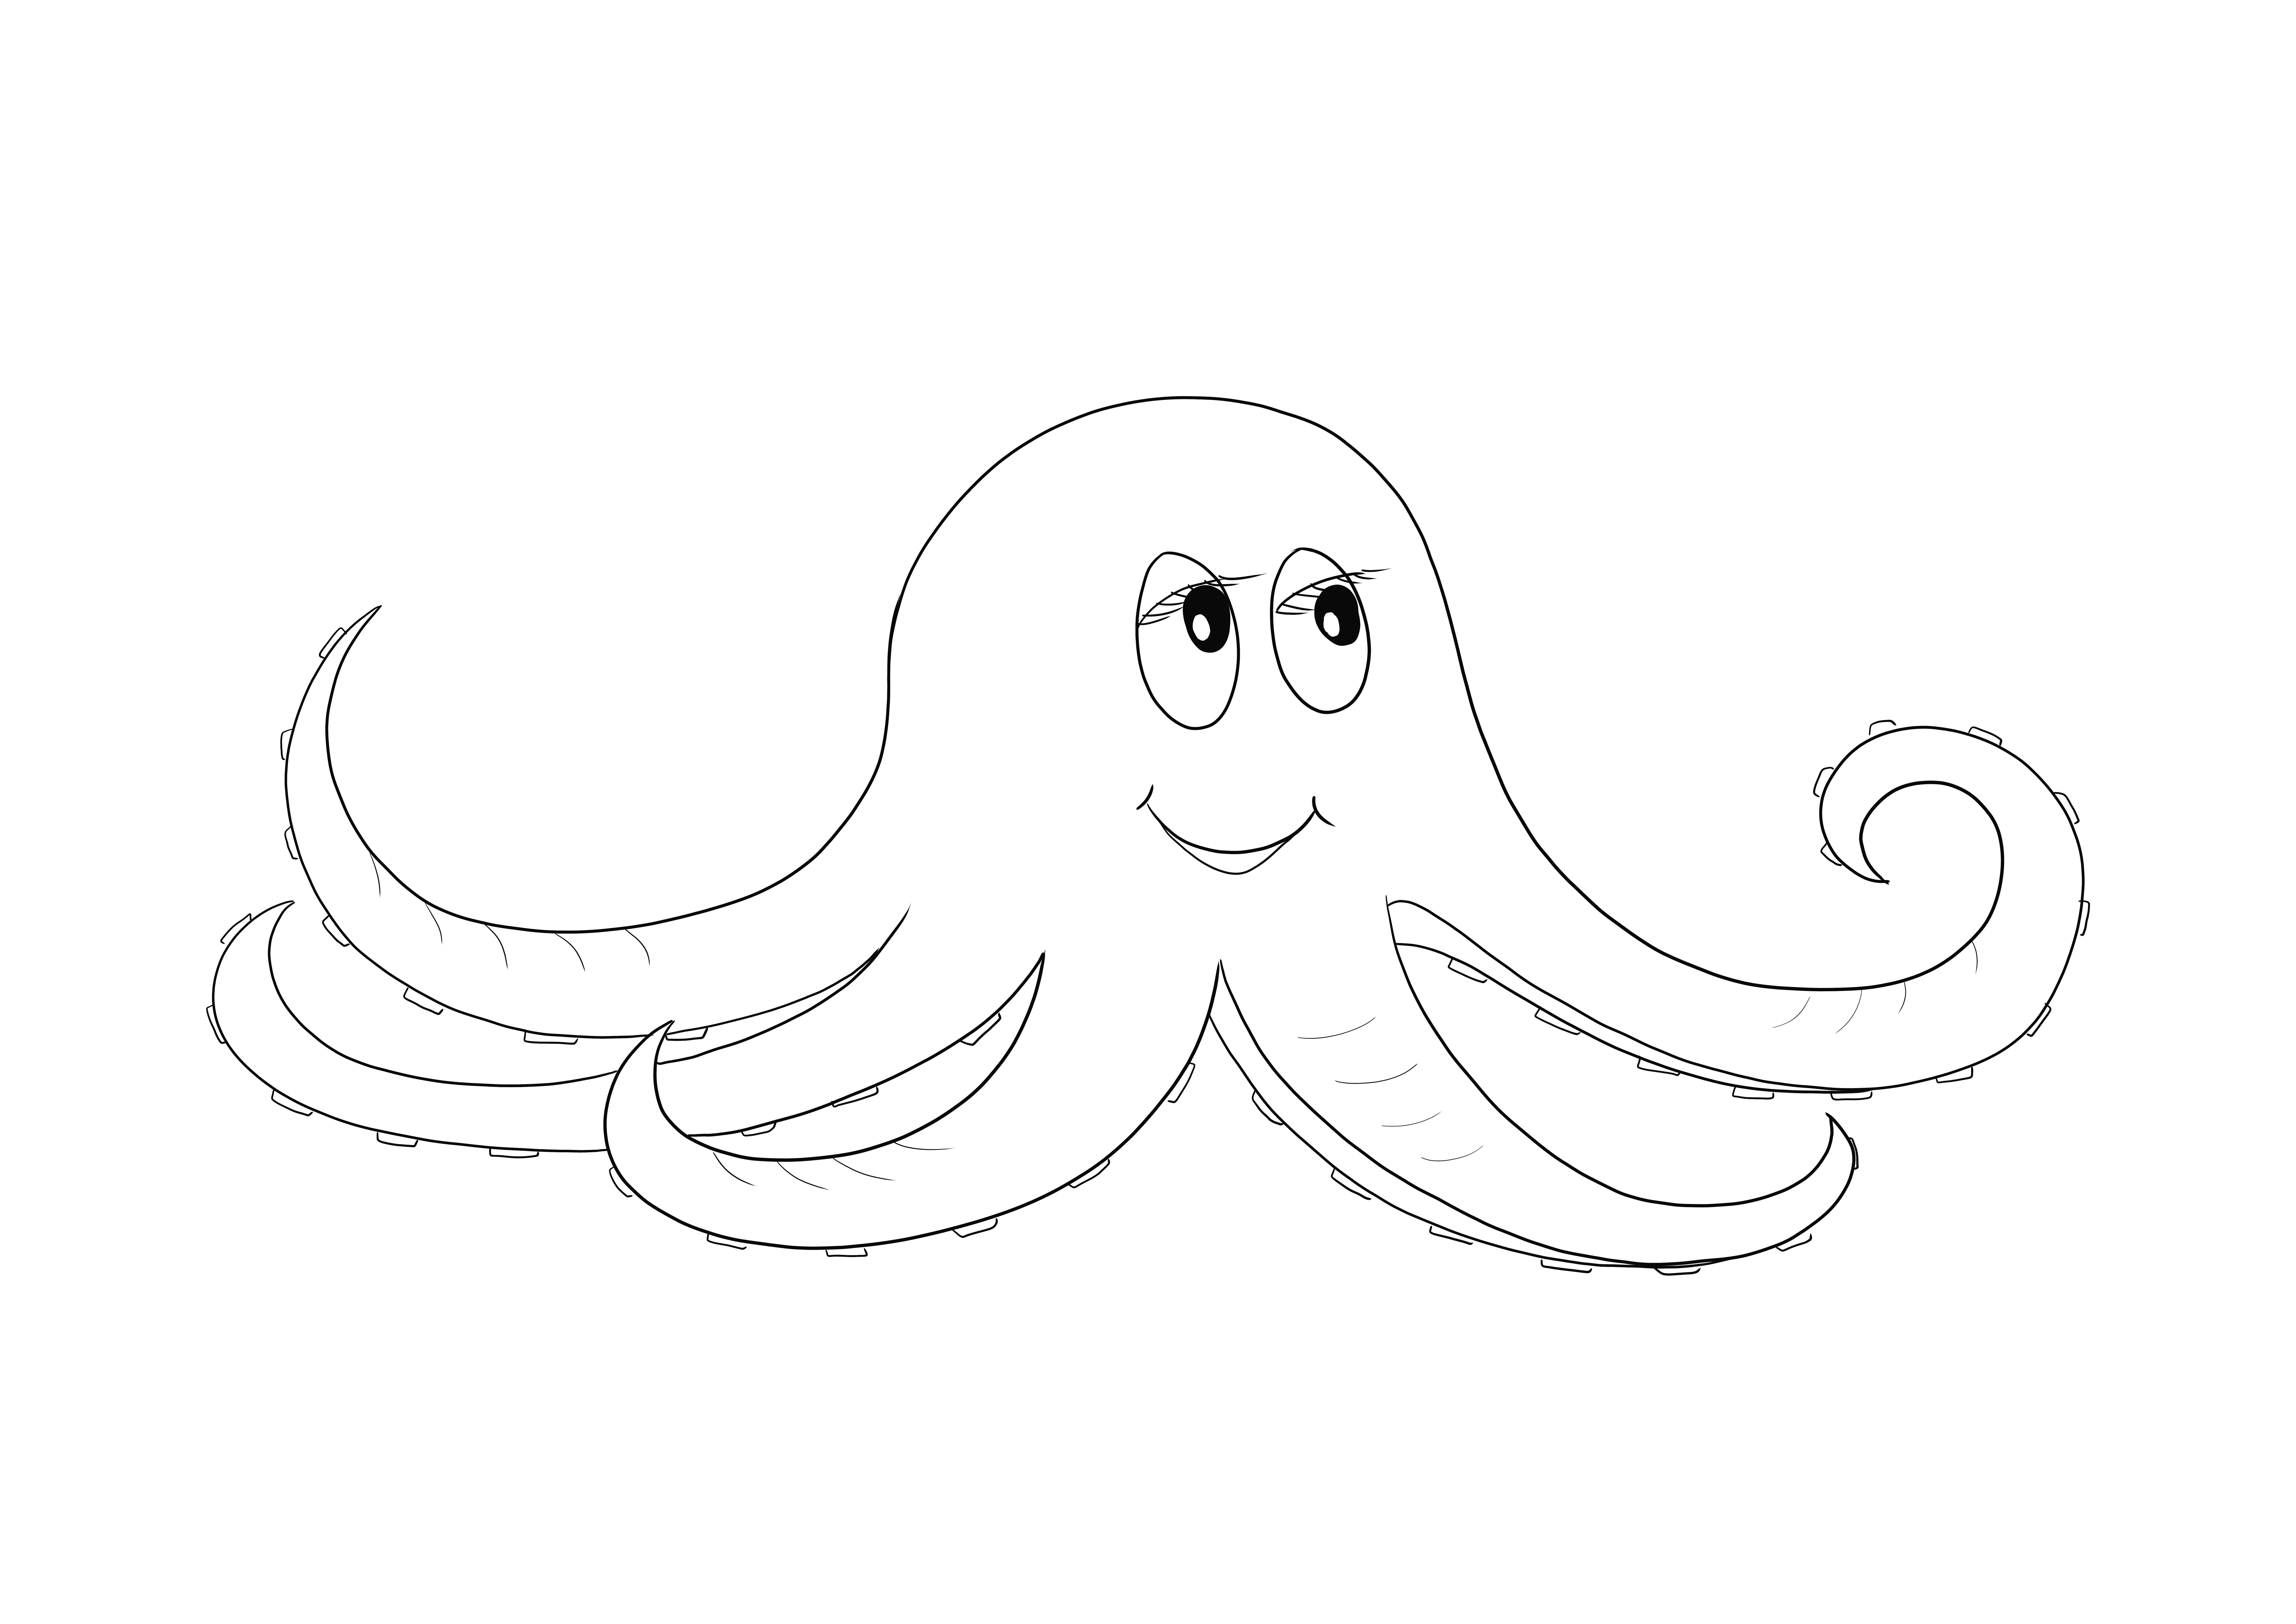 Funny cartoon Octopus coloring sheet to print for free and color